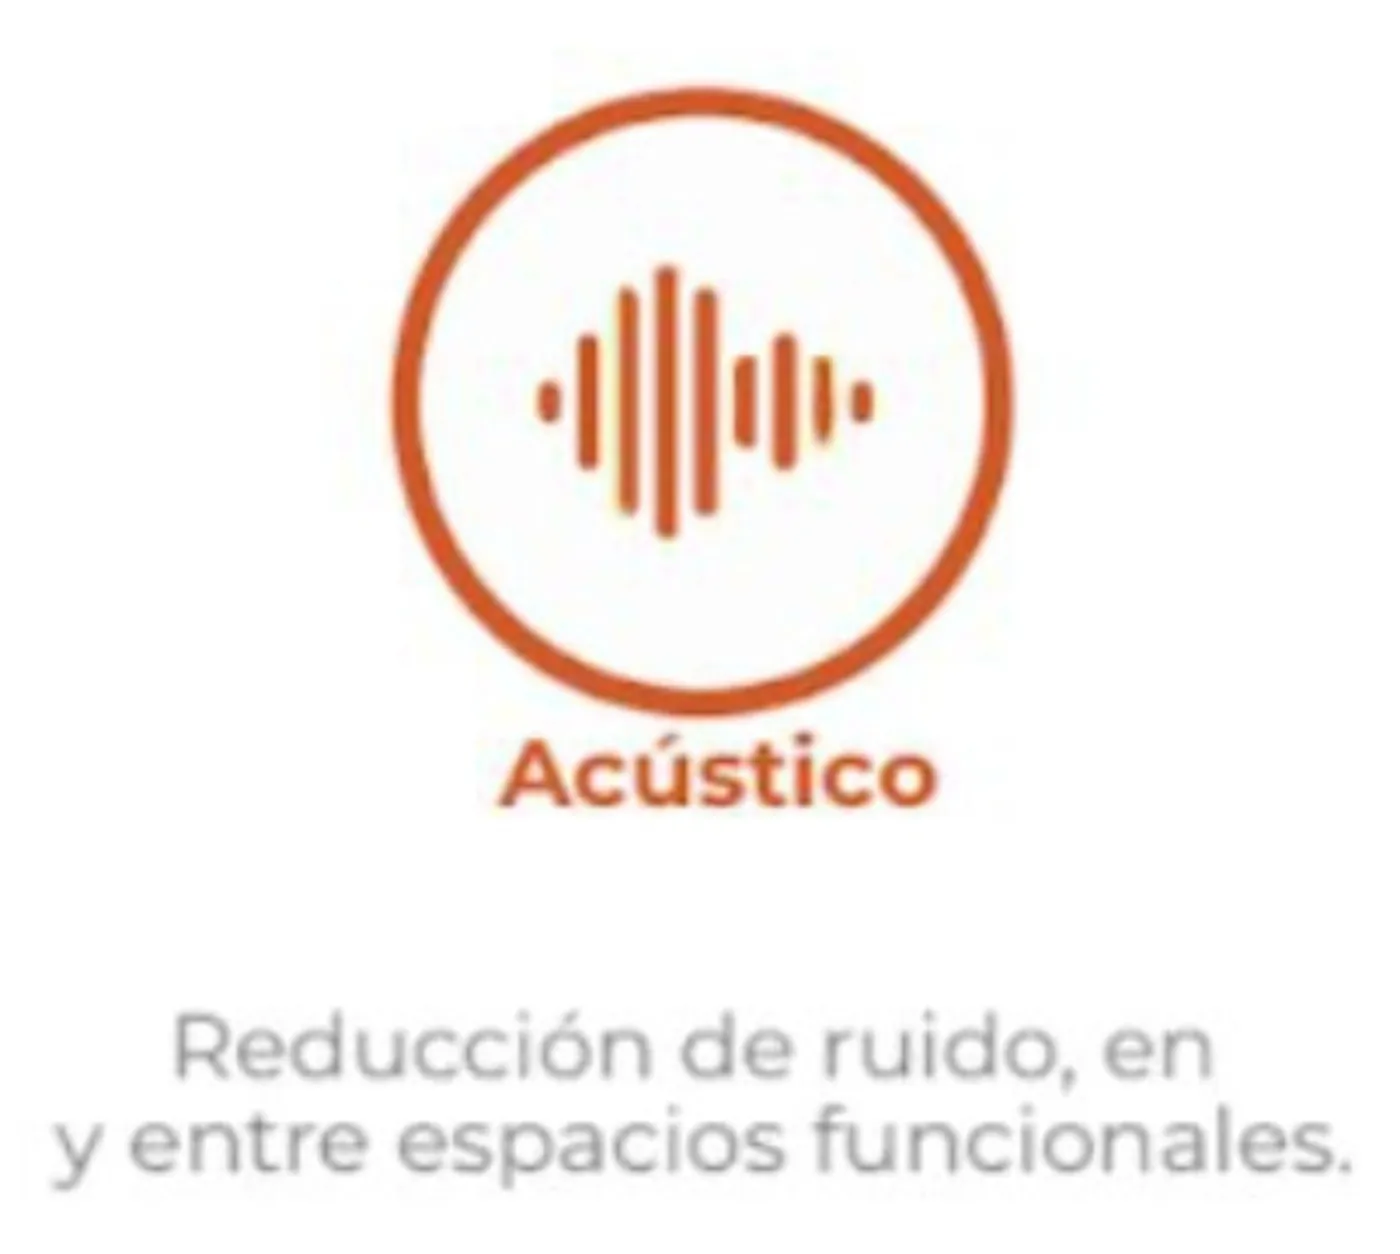 Piso/Tapete para hacer Ejercicio ECORE Profesional